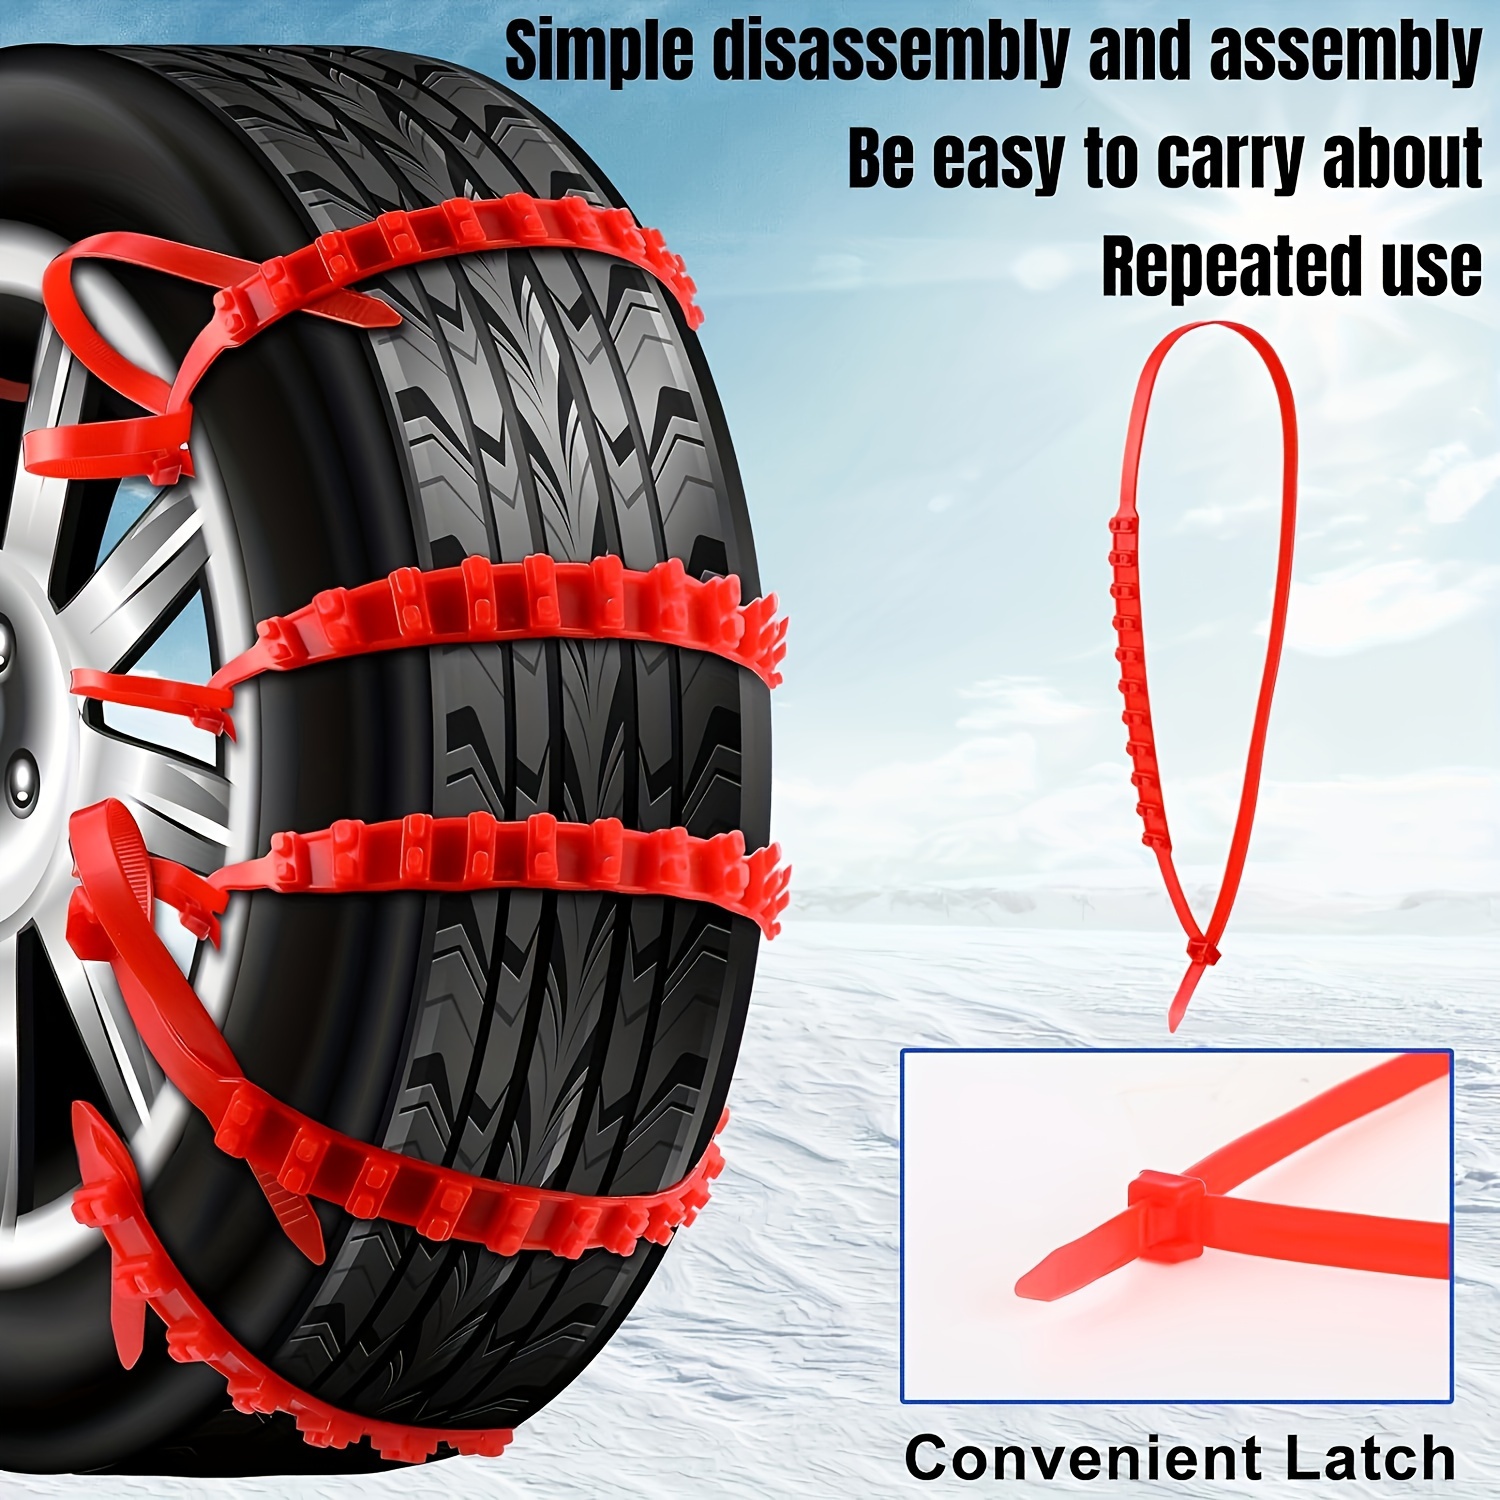 20pcs Anti Snow Chains Of Car Anti-Skid Snow Chains Non-Slip Cable Tie  Emergency Anti-Skid Chain For Car Off-Road Van SUV Pickup Trucks